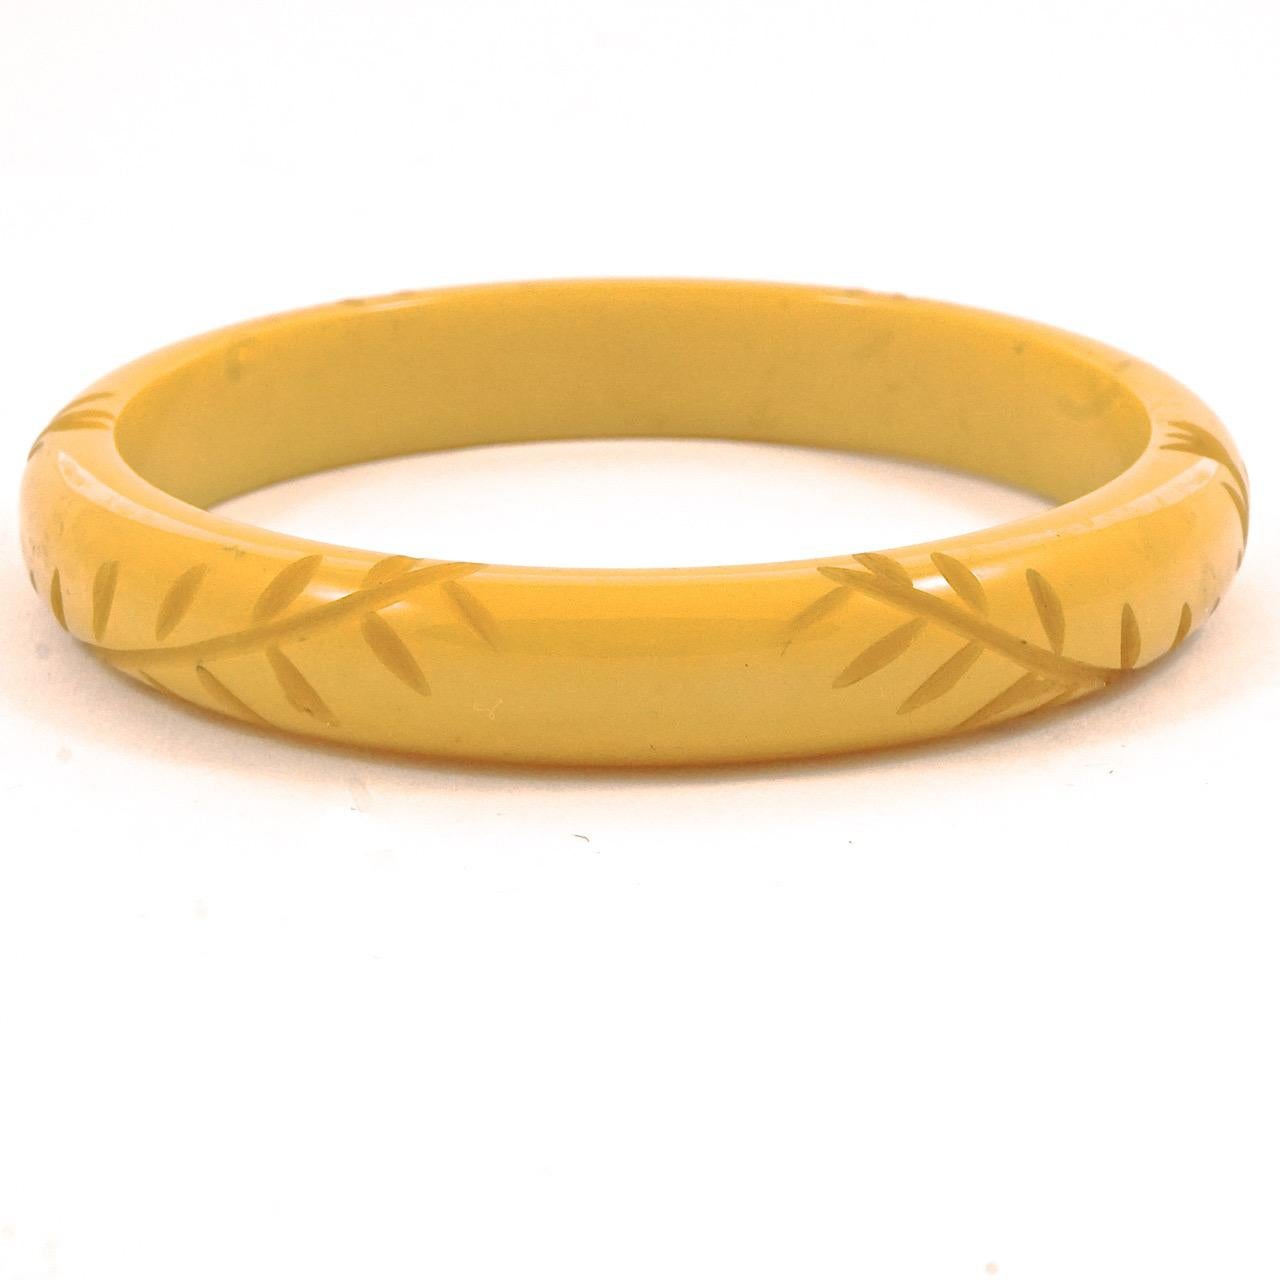 Wonderful Art Deco butterscotch yellow Bakelite bangle with lovely leaves carving. Inside diameter 6.3cm / 2.5 inches by width 1cm / .4 inch. The bangle is in very good condition.

This is a beautiful vintage carved Bakelite bangle in butterscotch